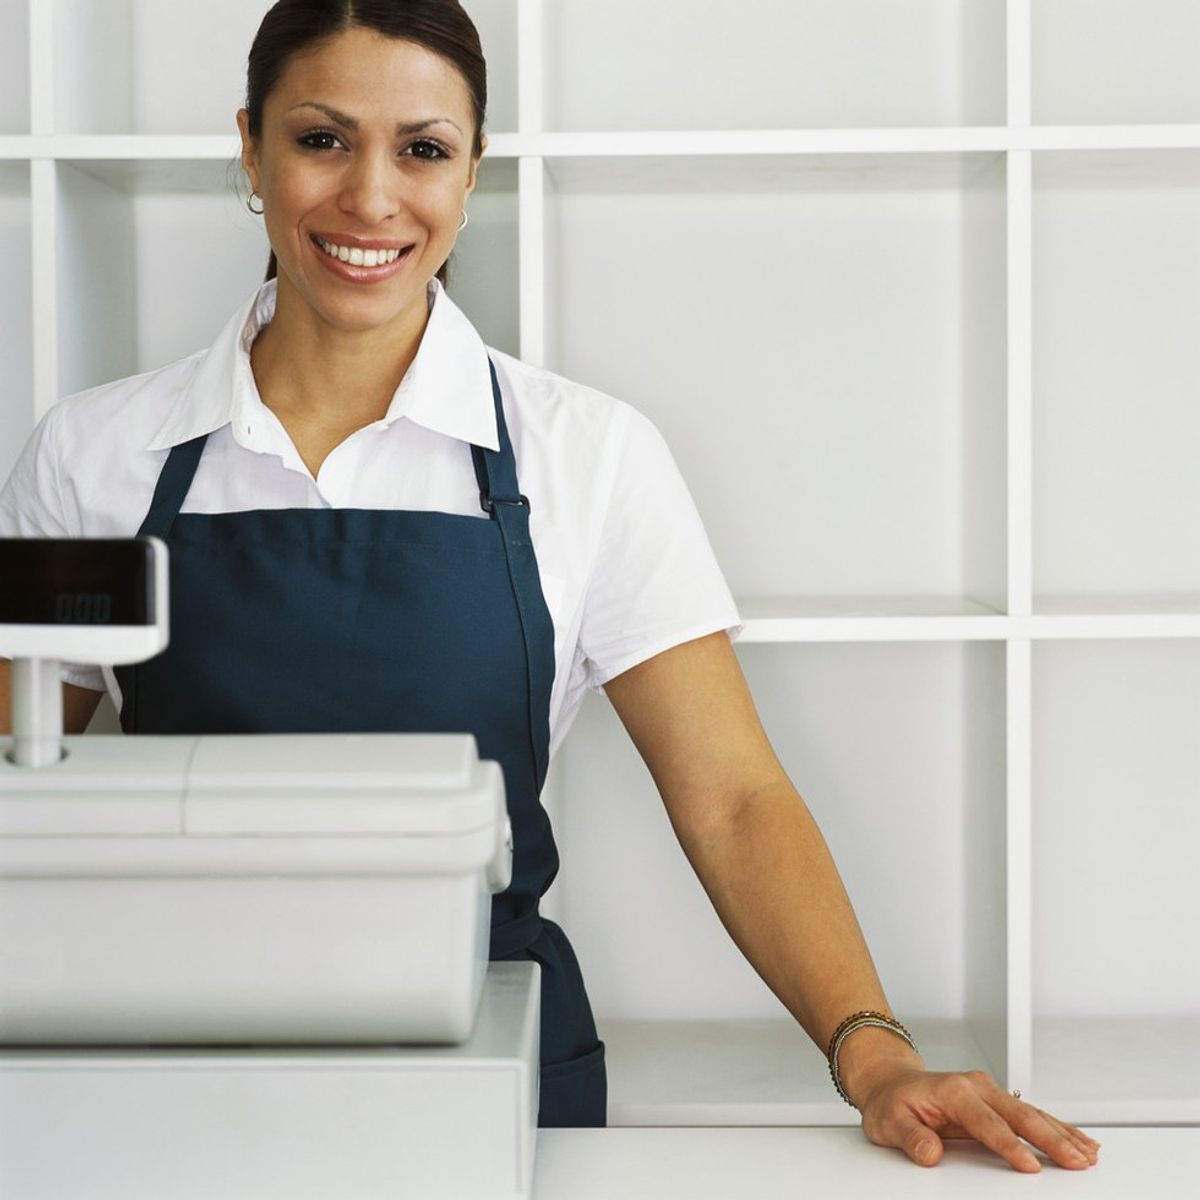 Six Things All Cashiers Hate to Hear